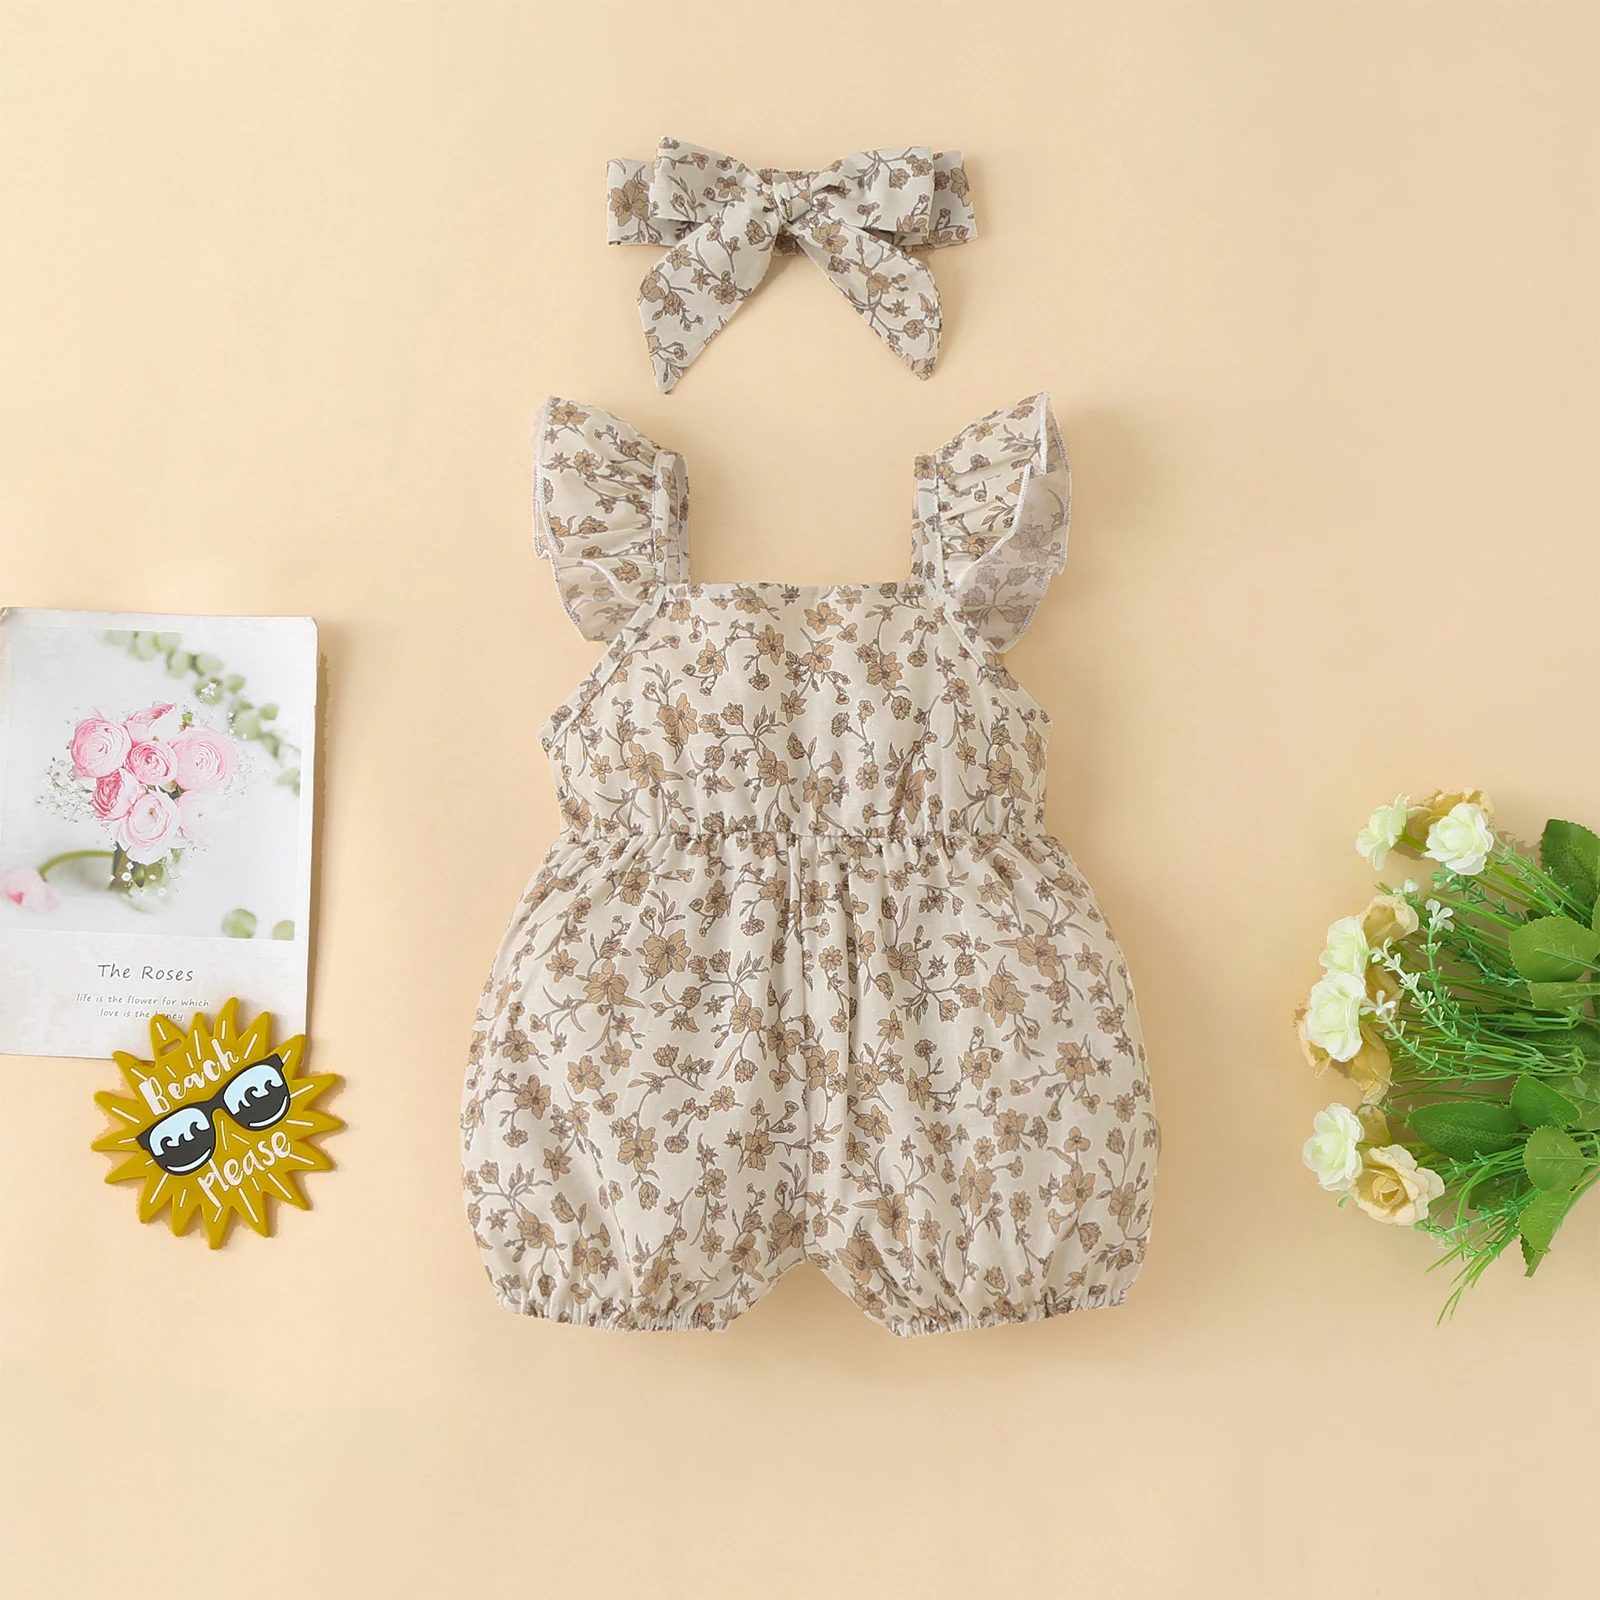 

Ma&Baby 3-24M Newborn Infant Baby Girl Romper Floral Print Ruffle Jumpsuit Overalls Sunsuit Summer Clothing D01